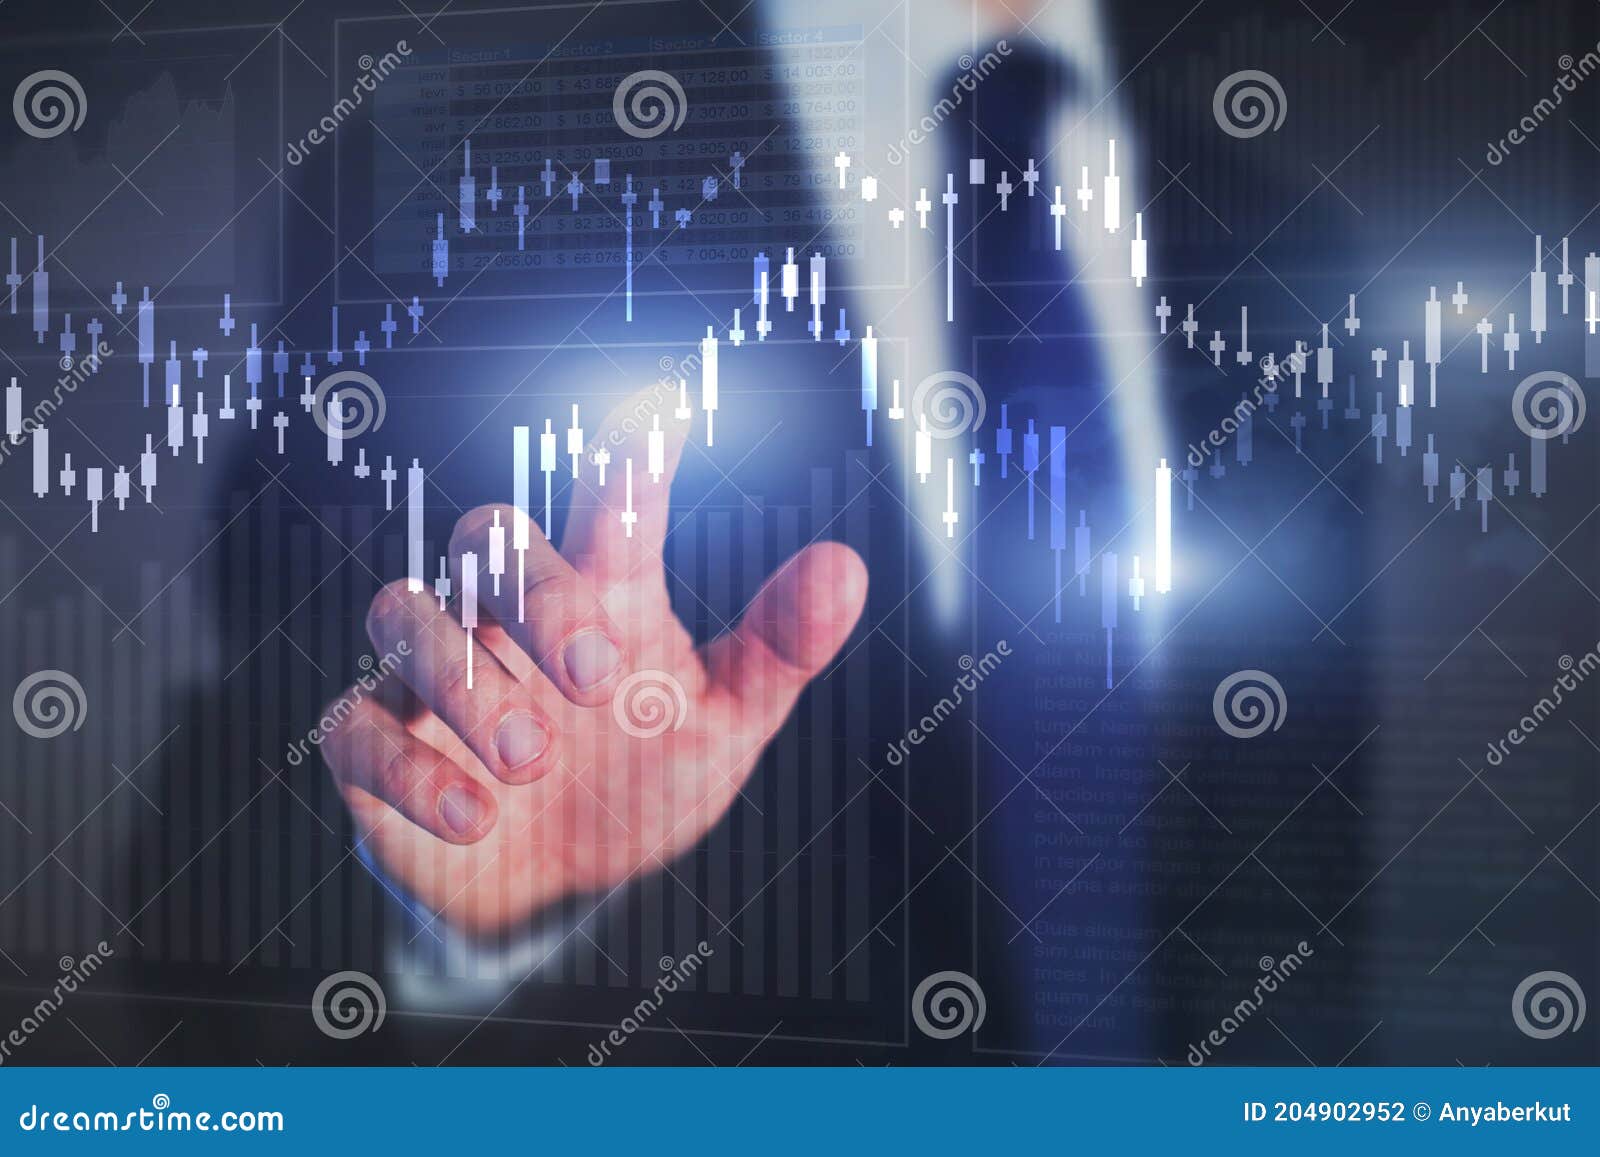 financial graphics and charts background, stock market concept